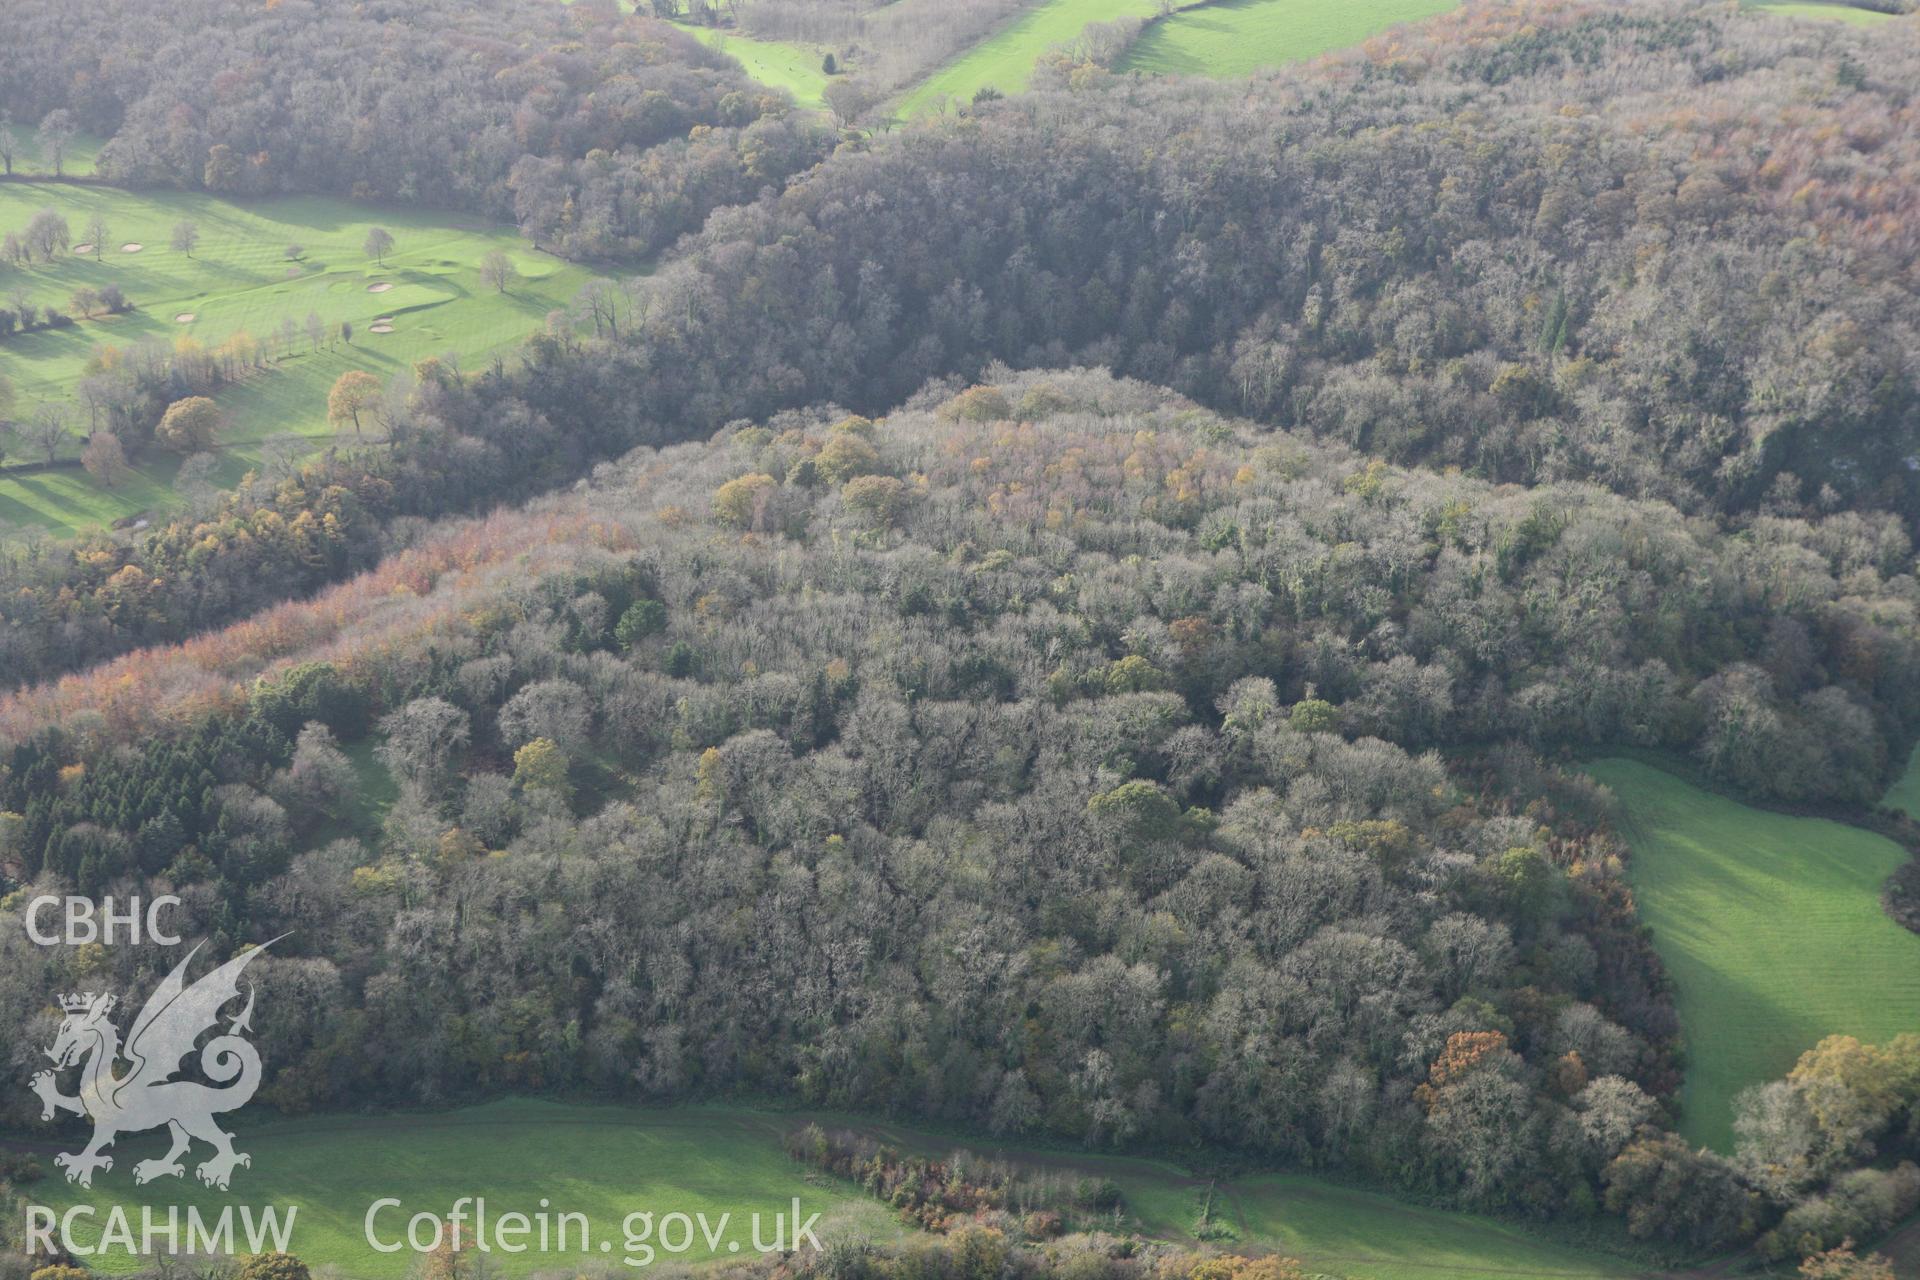 RCAHMW colour oblique photograph of Dinas Powys Fort (Cwm George Camp). Taken by Toby Driver on 17/11/2011.